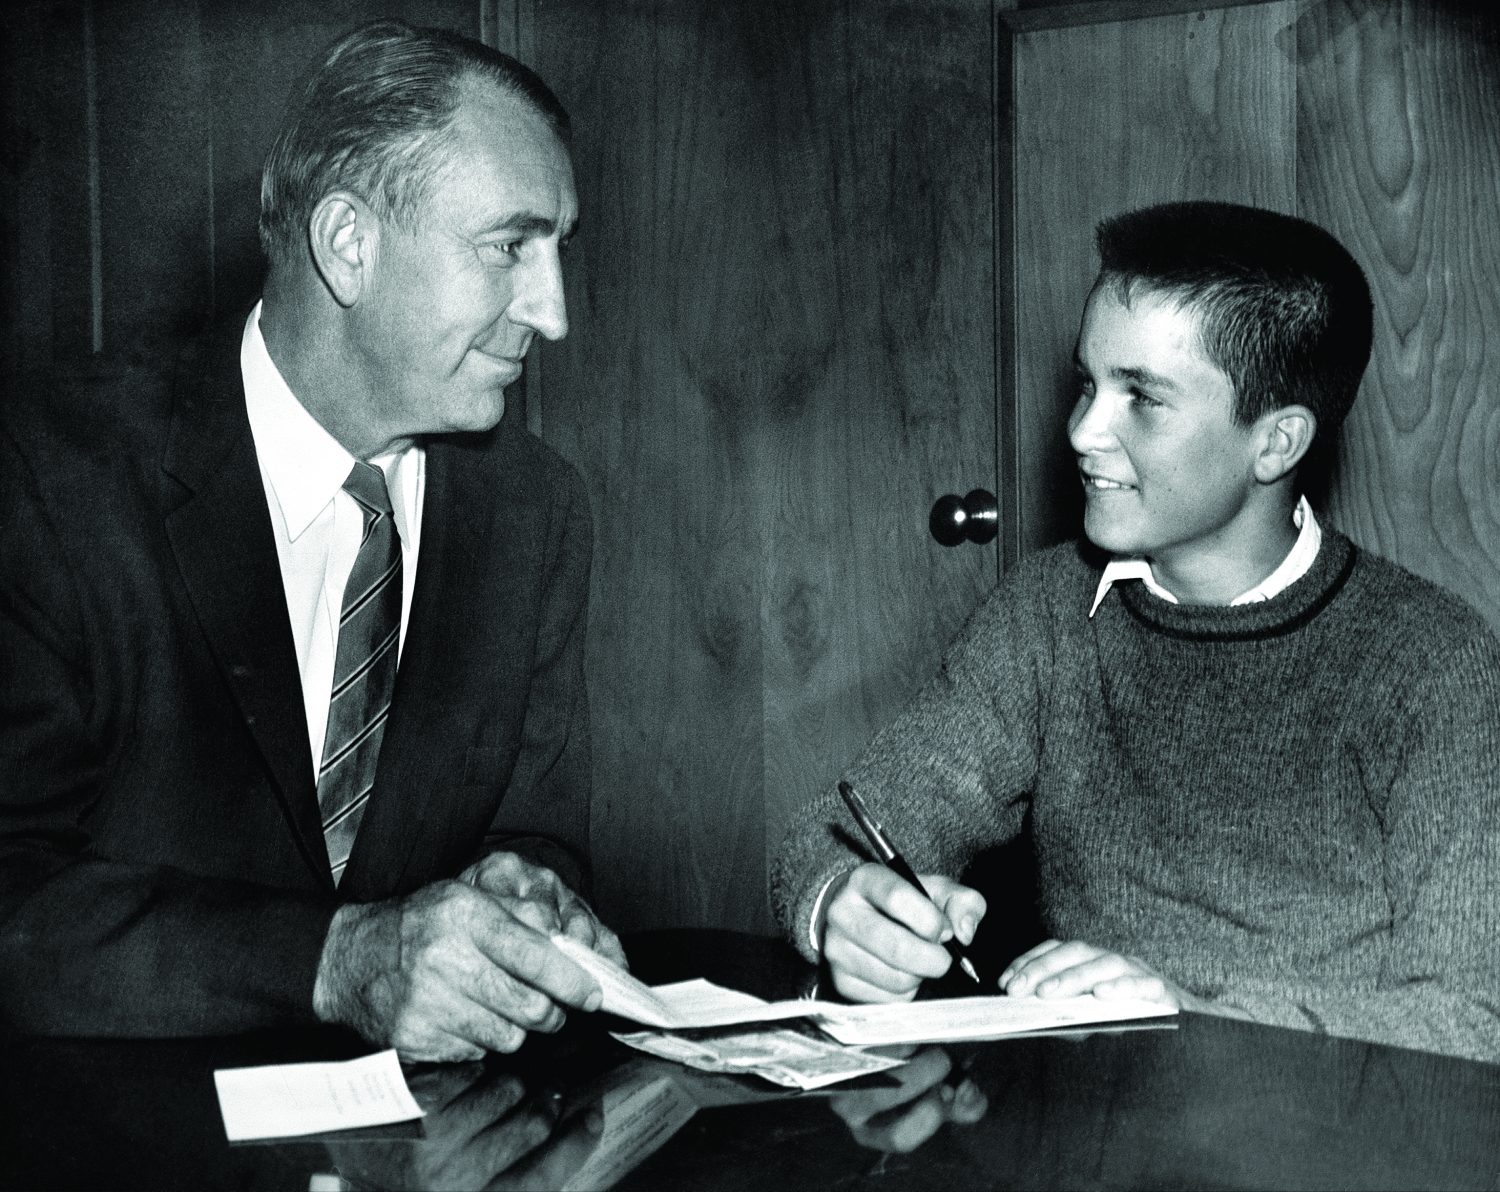 Dave Packard working with a student as part of the Junior Achievement program in 1959.